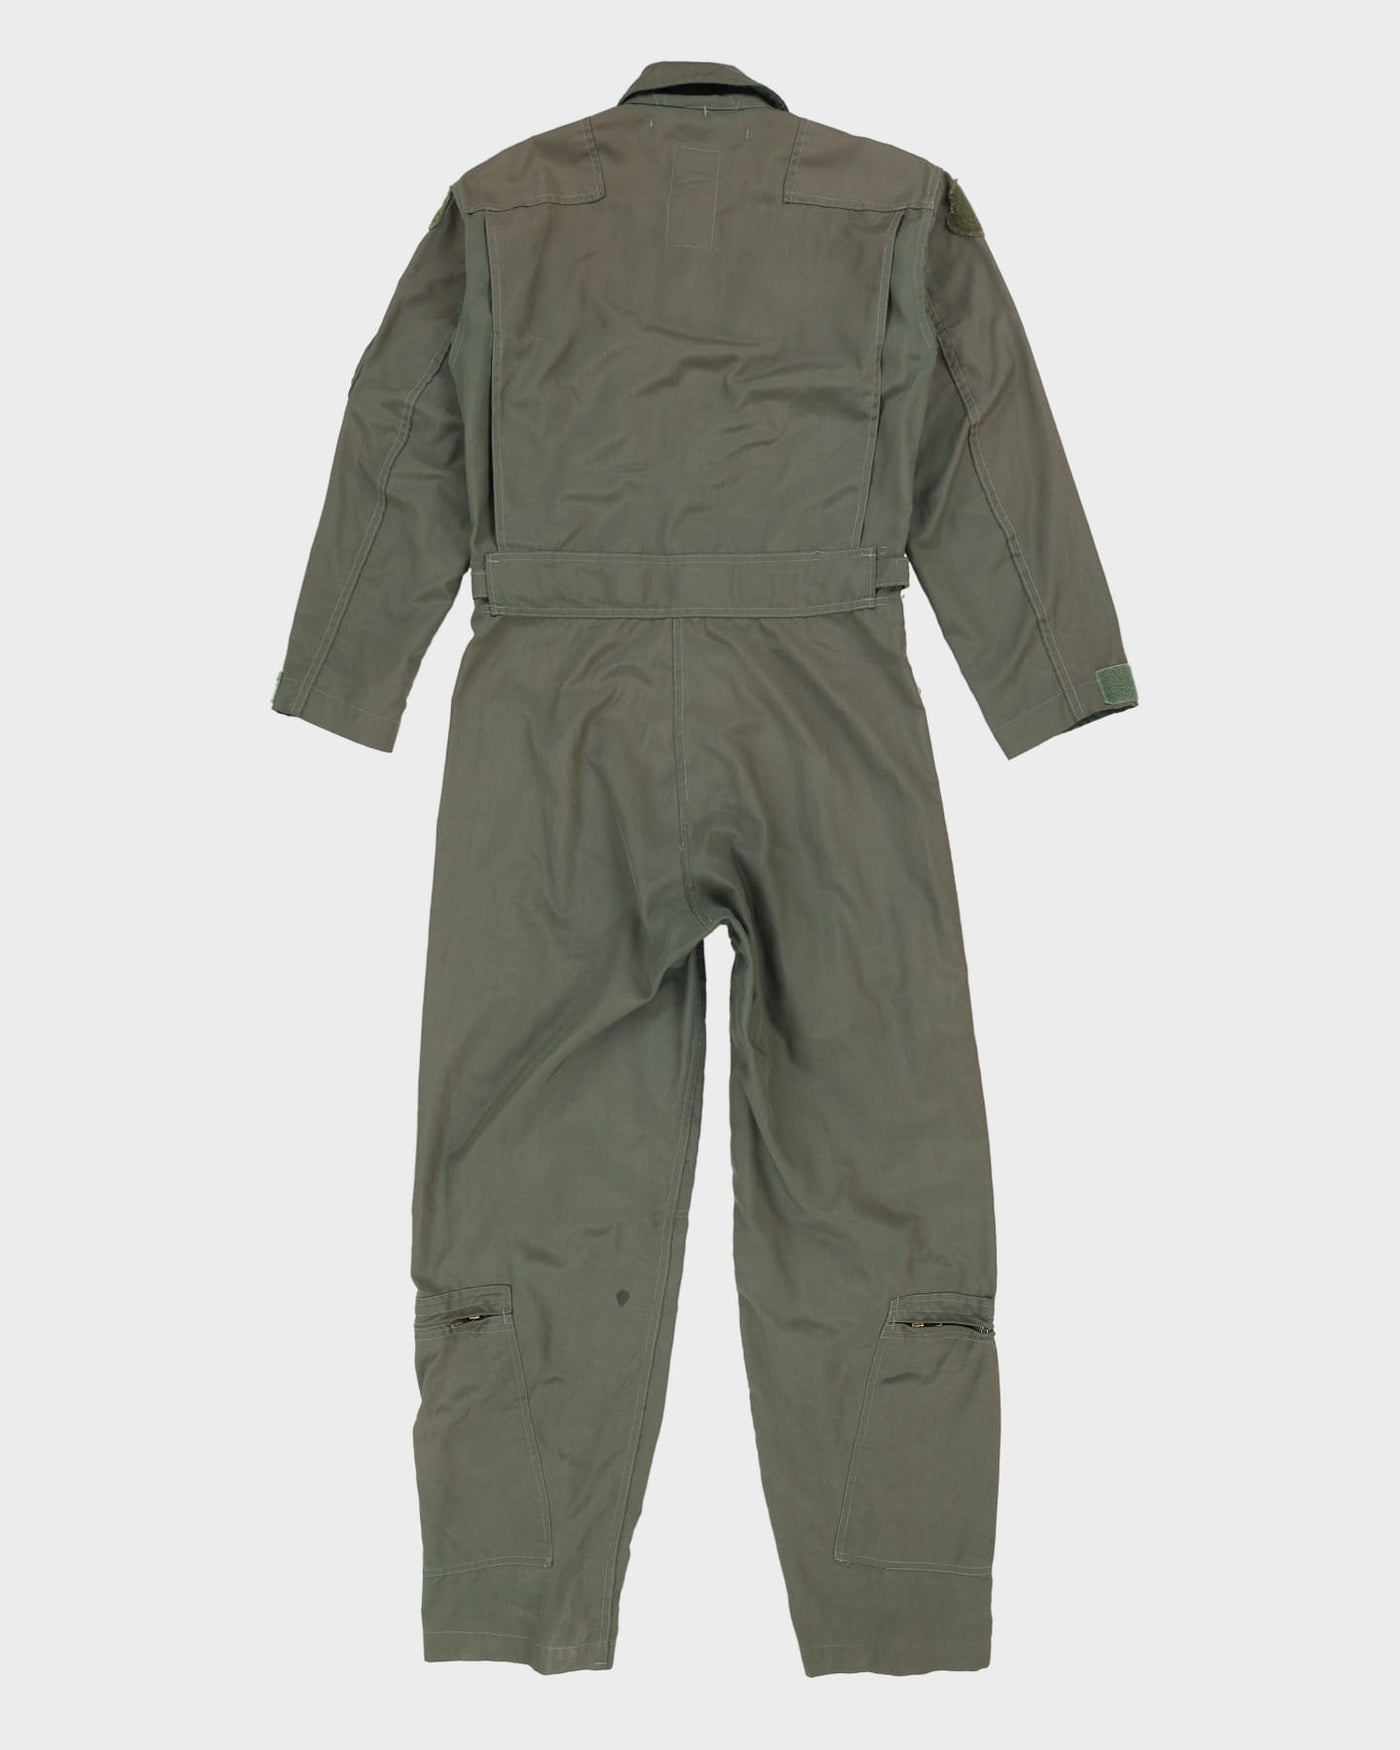 90s Vintage US Air Force CWU Flight Suit - Small